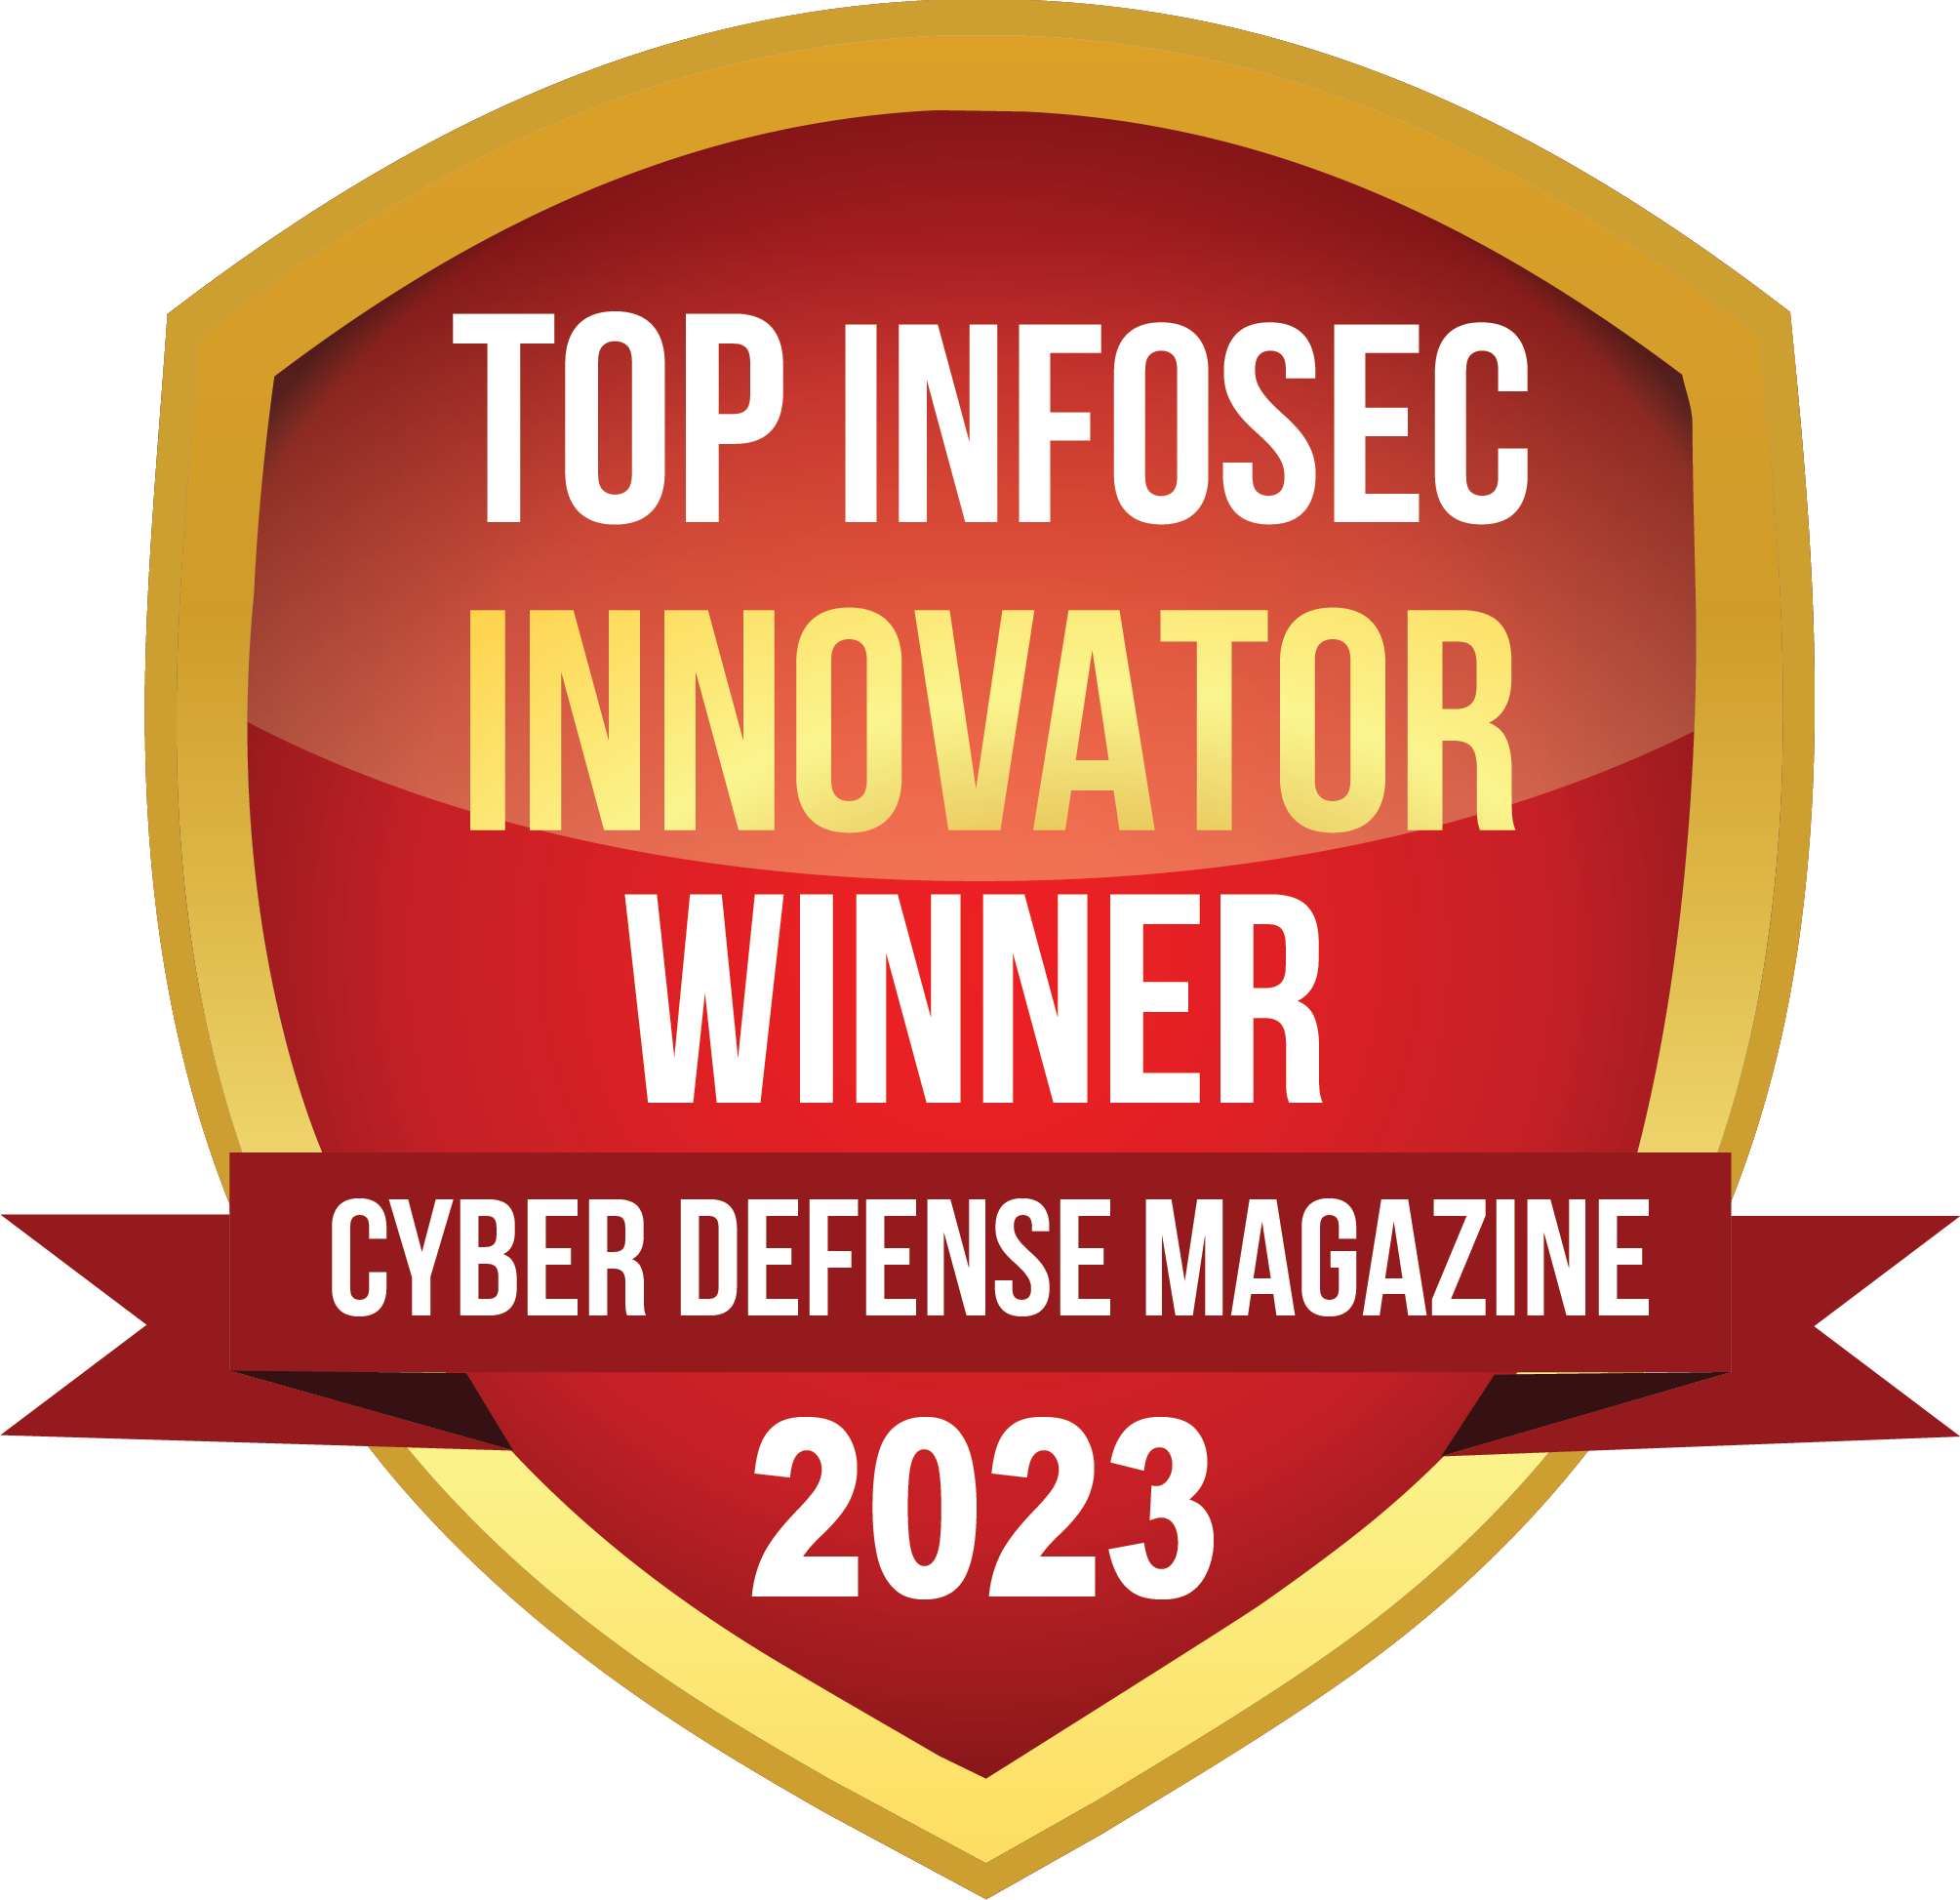 Syxsense Wins Cyber Defense Magazine’s 2023 Top InfoSec Innovator Award for Most Innovative Vulnerability Assessment, Remediation, and Management Solution